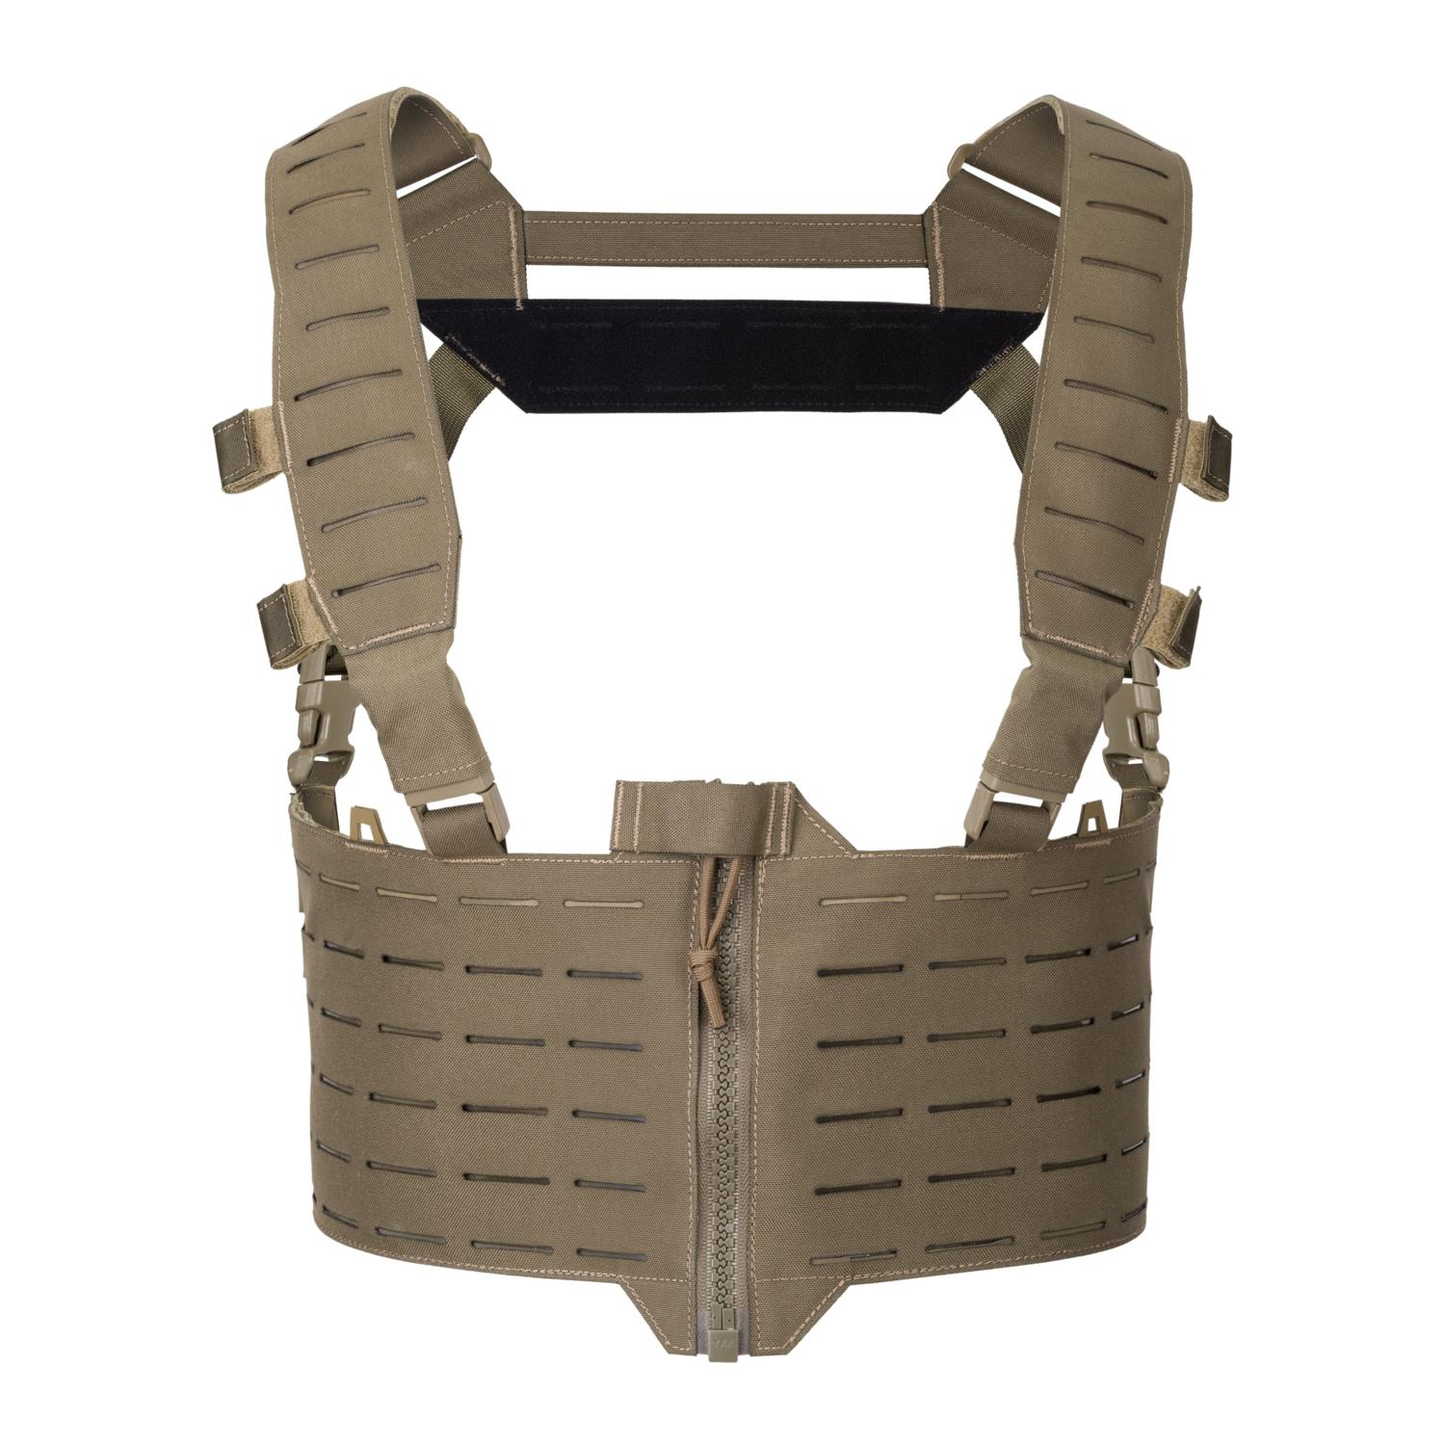 DIRECT ACTION BASE TATTICO VEST SF WARWICK ZIP FRONT CHEST RIG - COYOTE BROWN CB